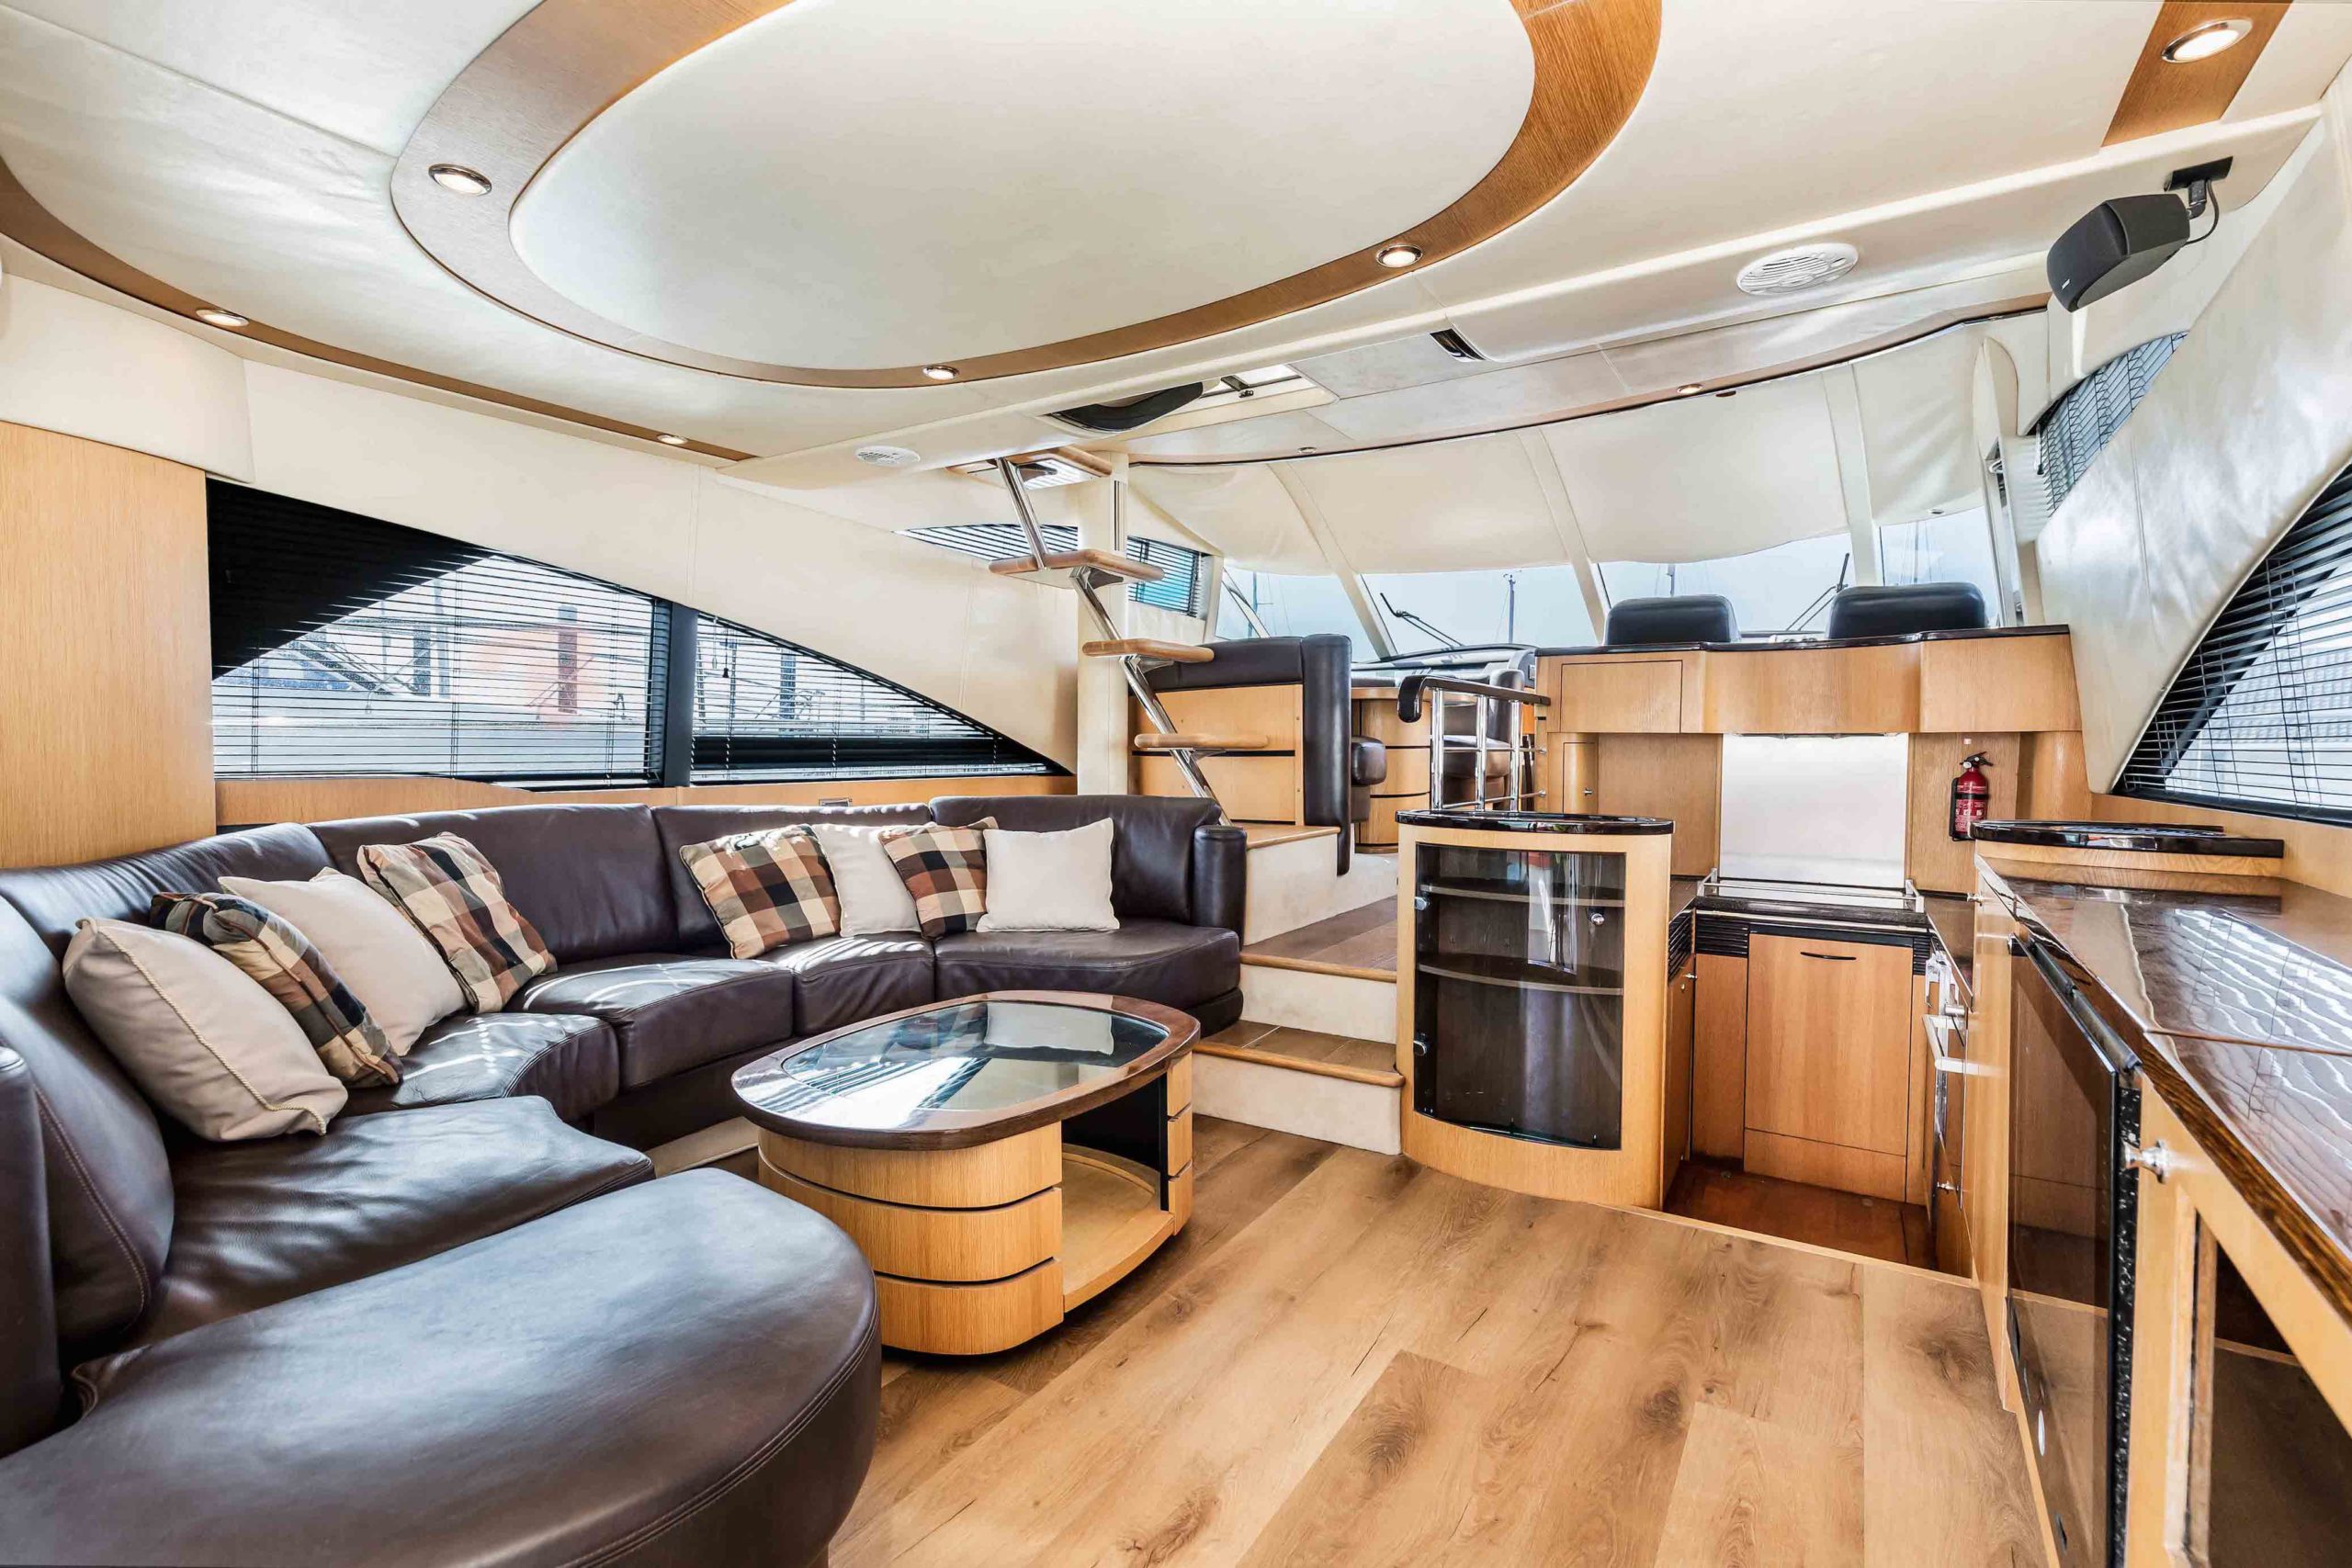 Fairline 58 saloon interior with brown sofa and tired decor